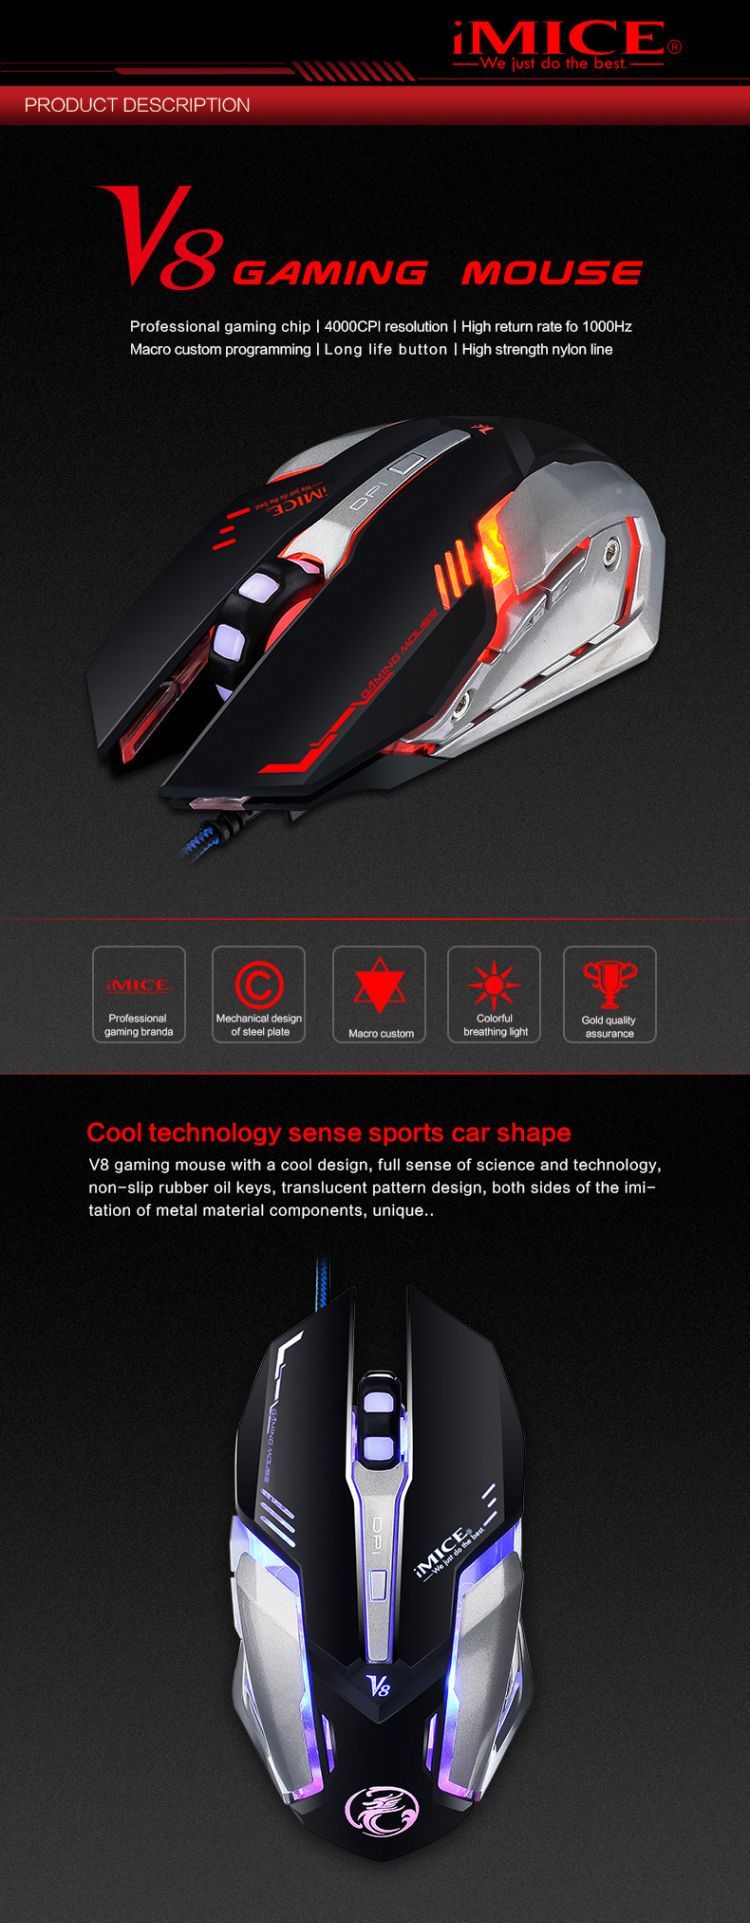 IMICE-V8-USB-Wired-RGB-Gaming-Mouse-4000DPI-Macro-Programming-6D-Optical-Mechannical-Computer-Gamer--1622474